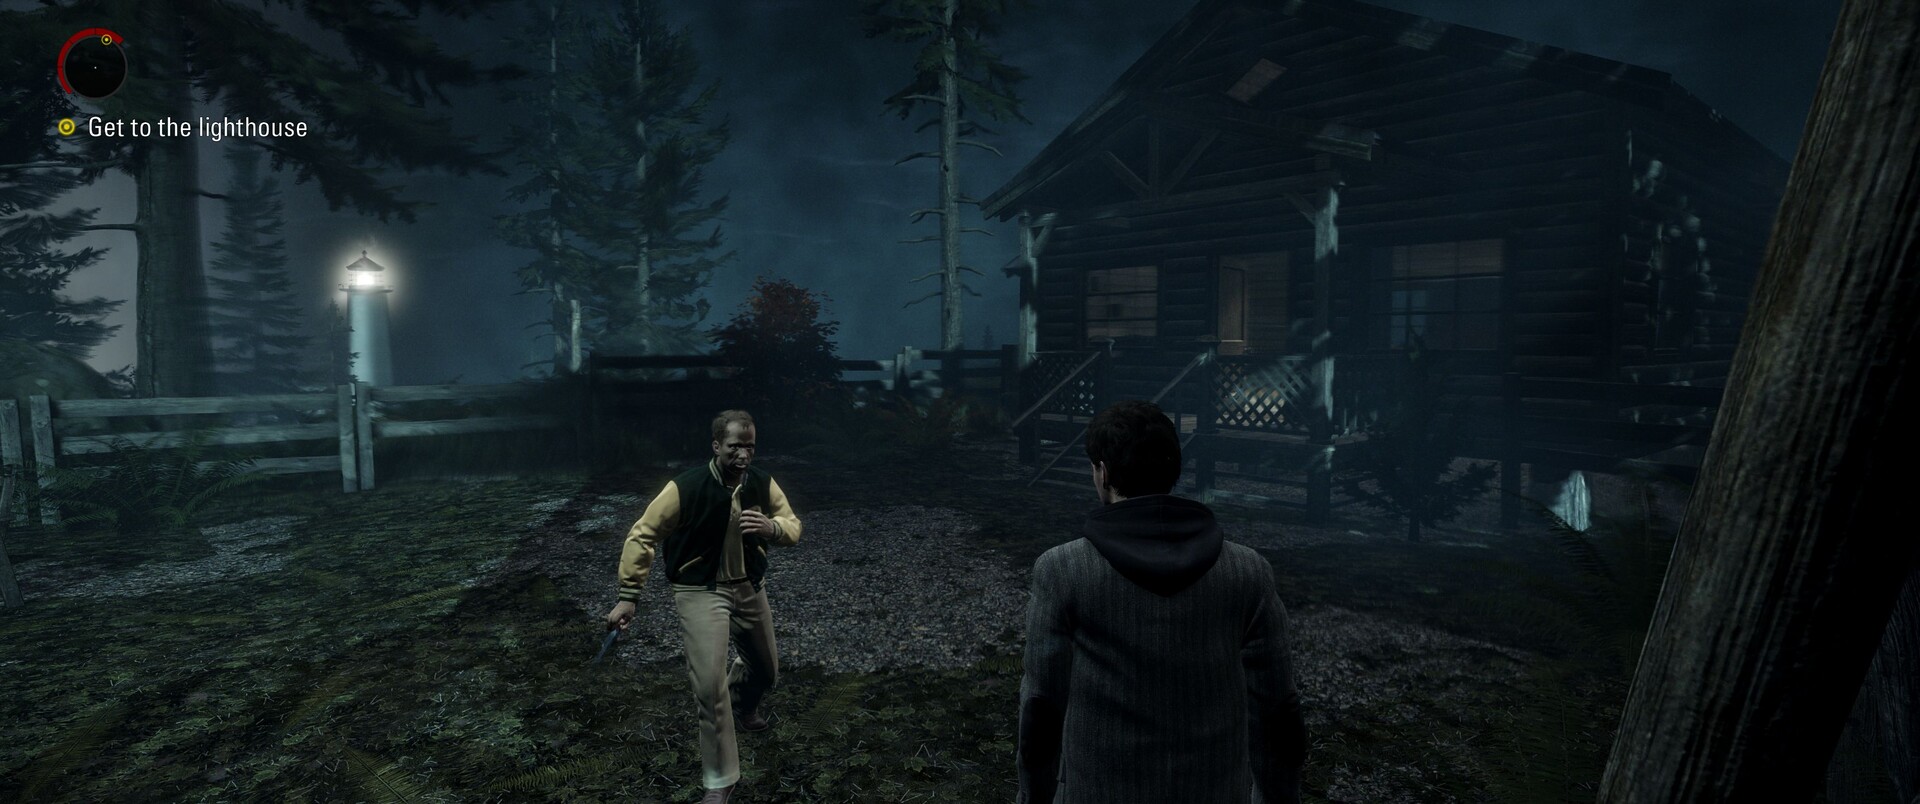 The full Alan Wake Remastered system requirements are here